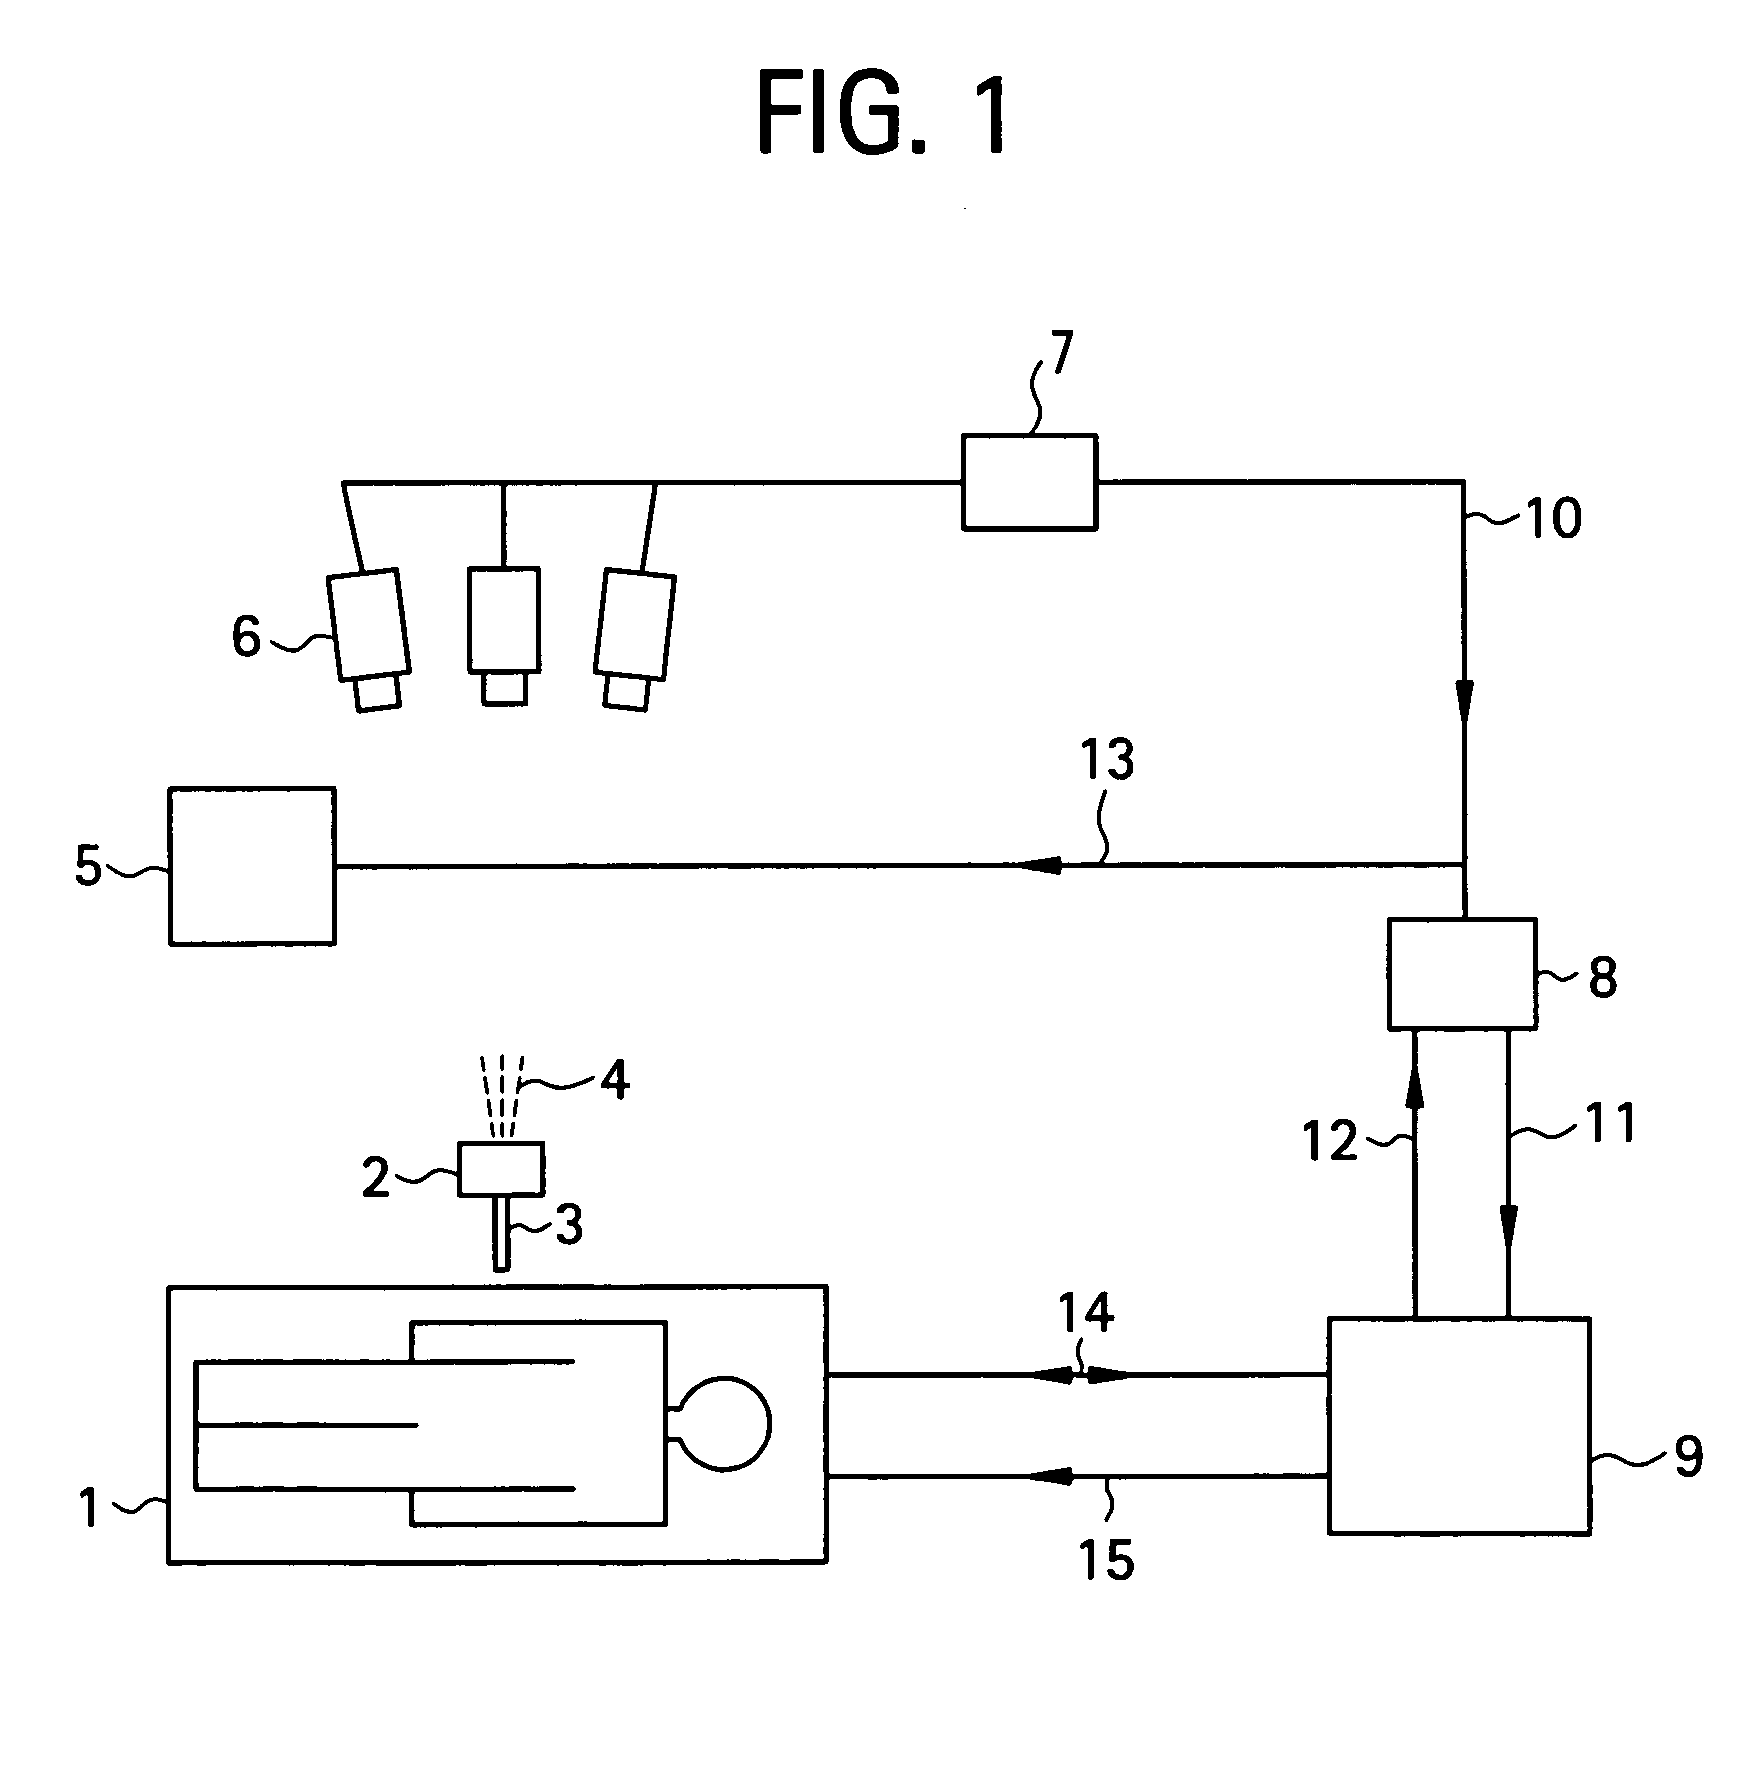 Self-referencing/body motion tracking non-invasive internal temperature distribution measurement method and apparatus using magnetic resonance tomographic imaging technique